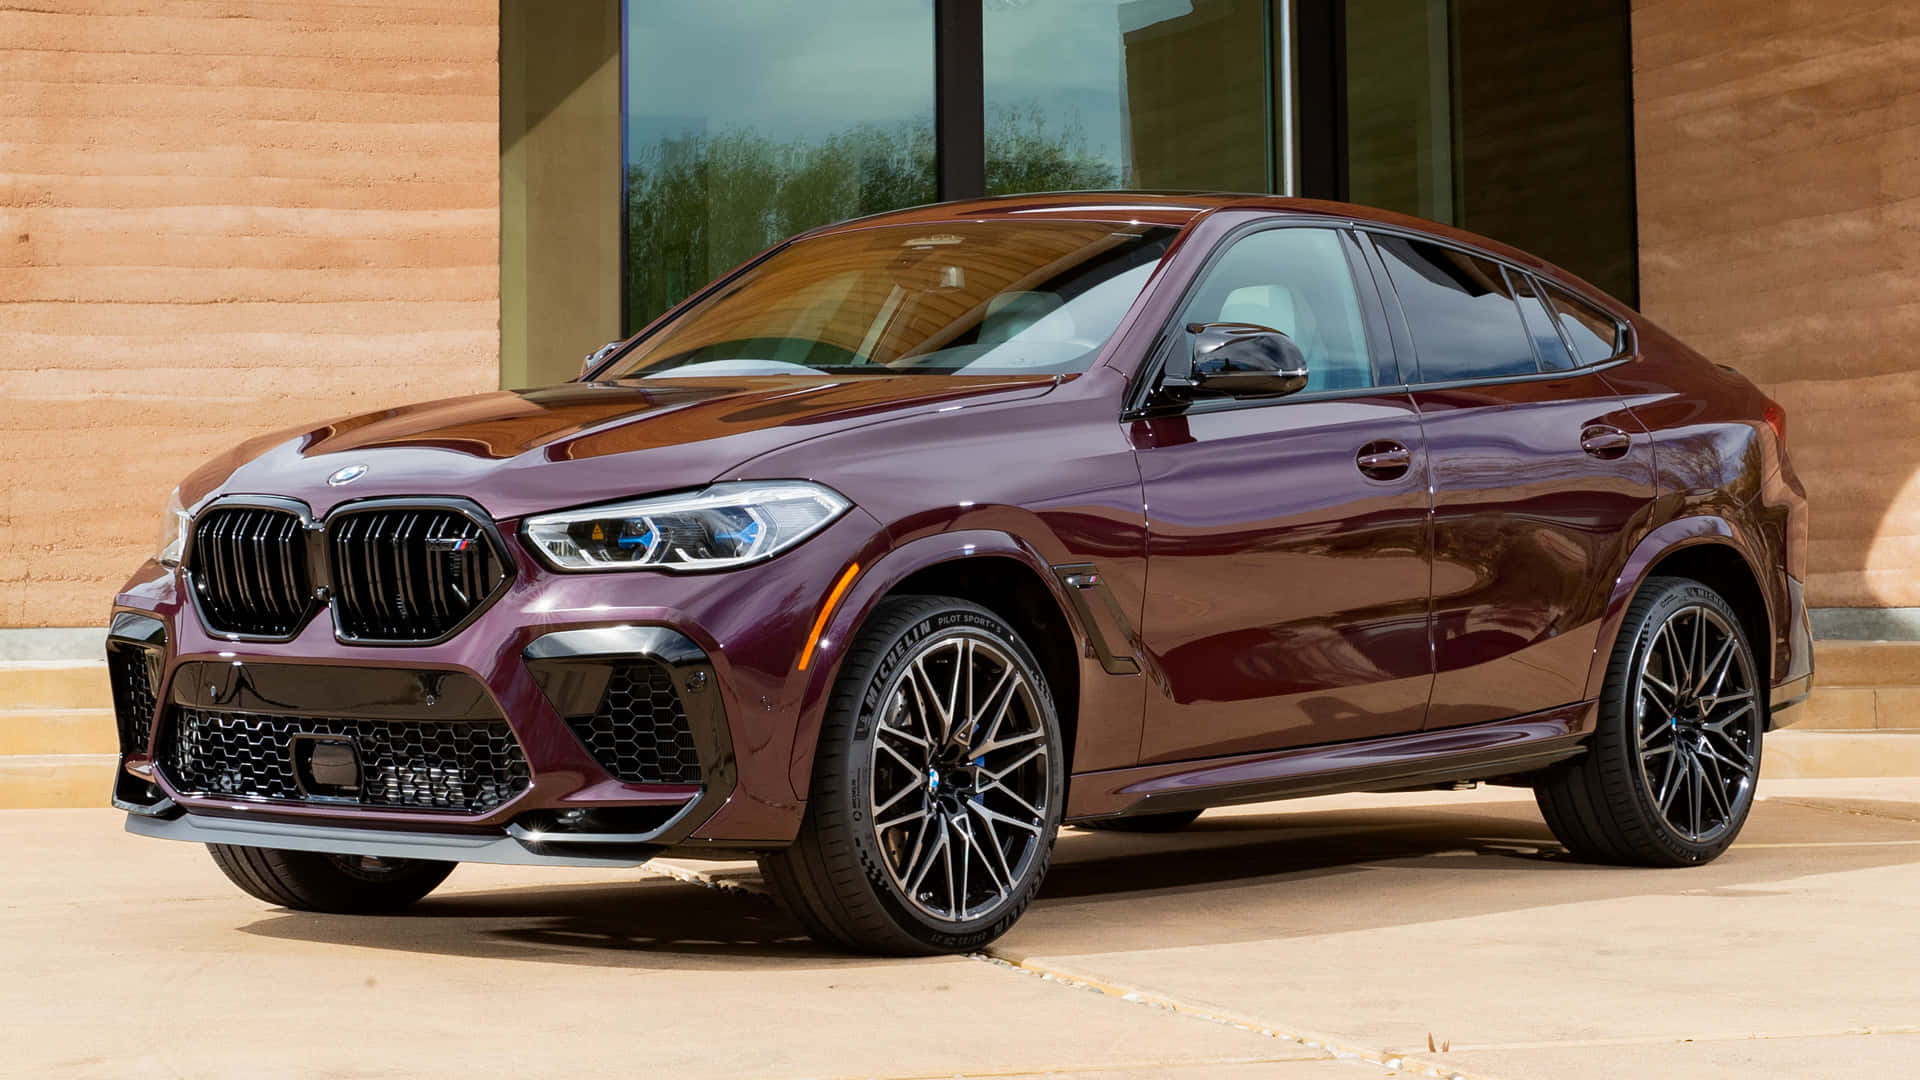 The 2019 Bmw X4 Is Parked In Front Of A Building